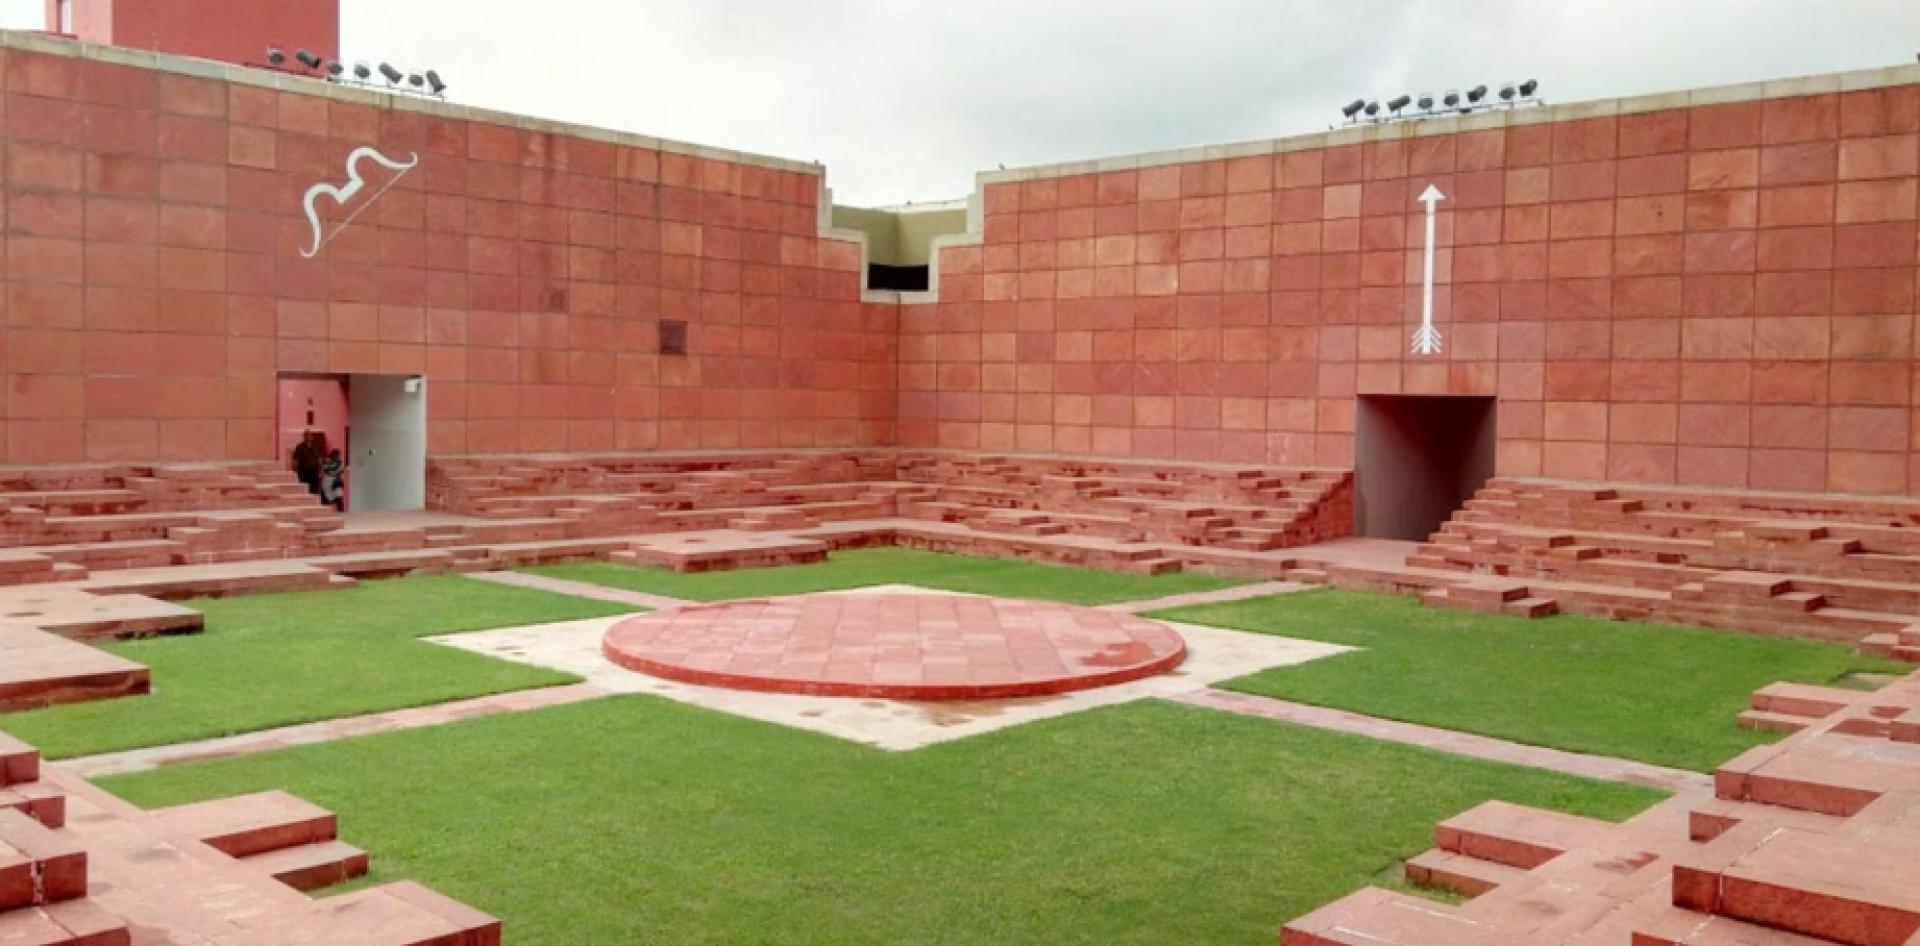 The built, forms an introverted courtyard and performance area at the Jawahar Kala Kendra in Jaipur. | Photo Jaipur Tourism